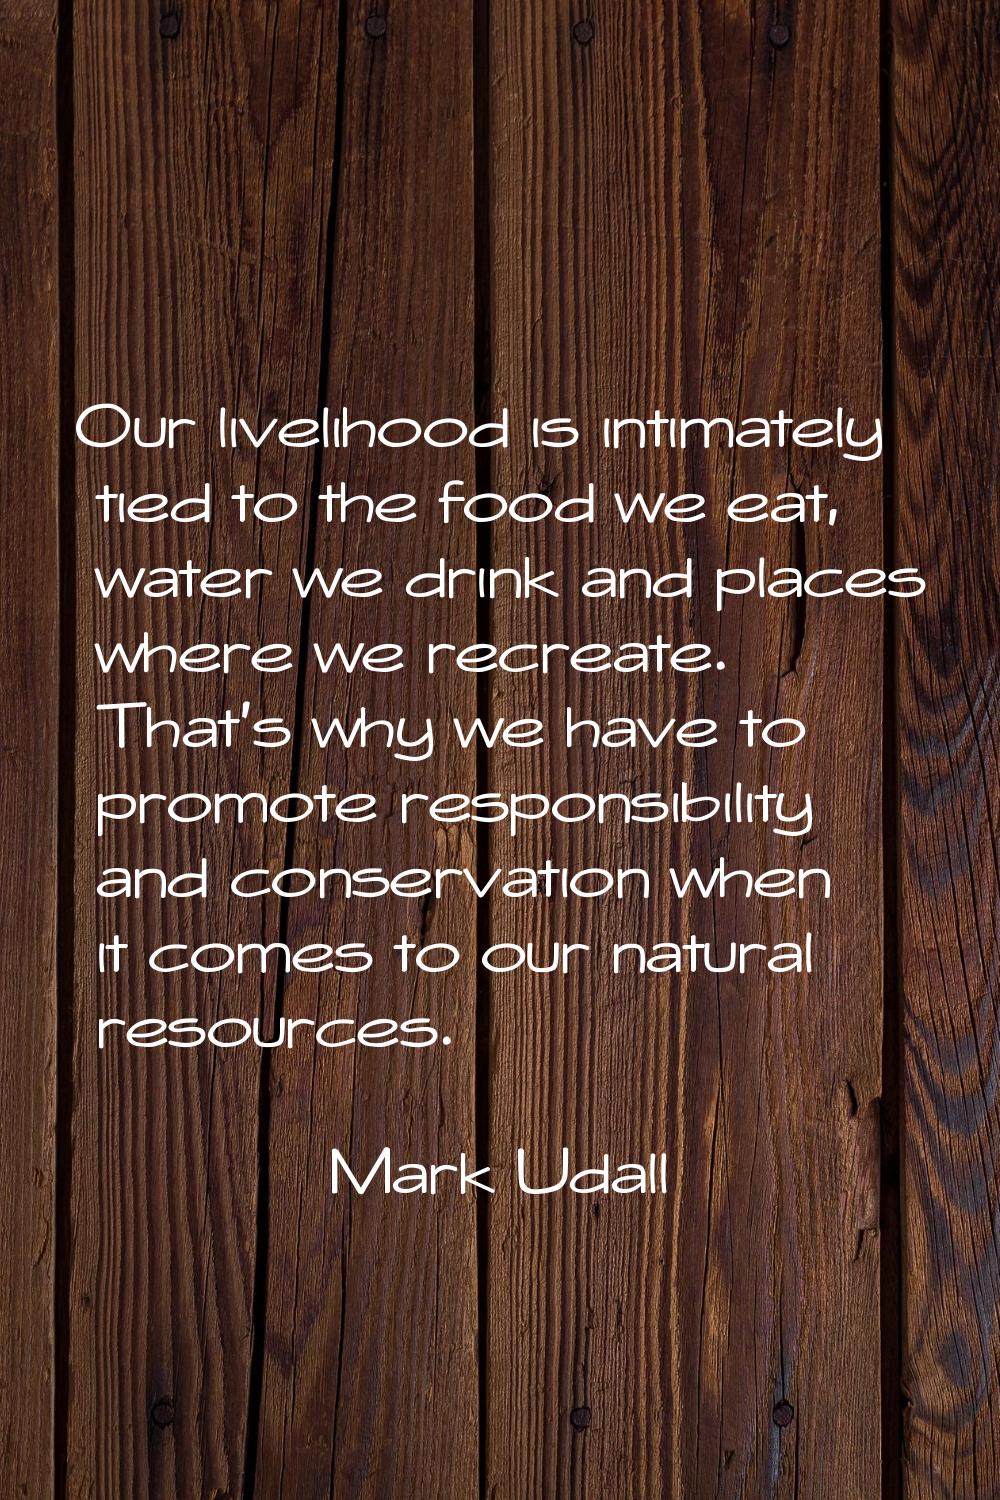 Our livelihood is intimately tied to the food we eat, water we drink and places where we recreate. 